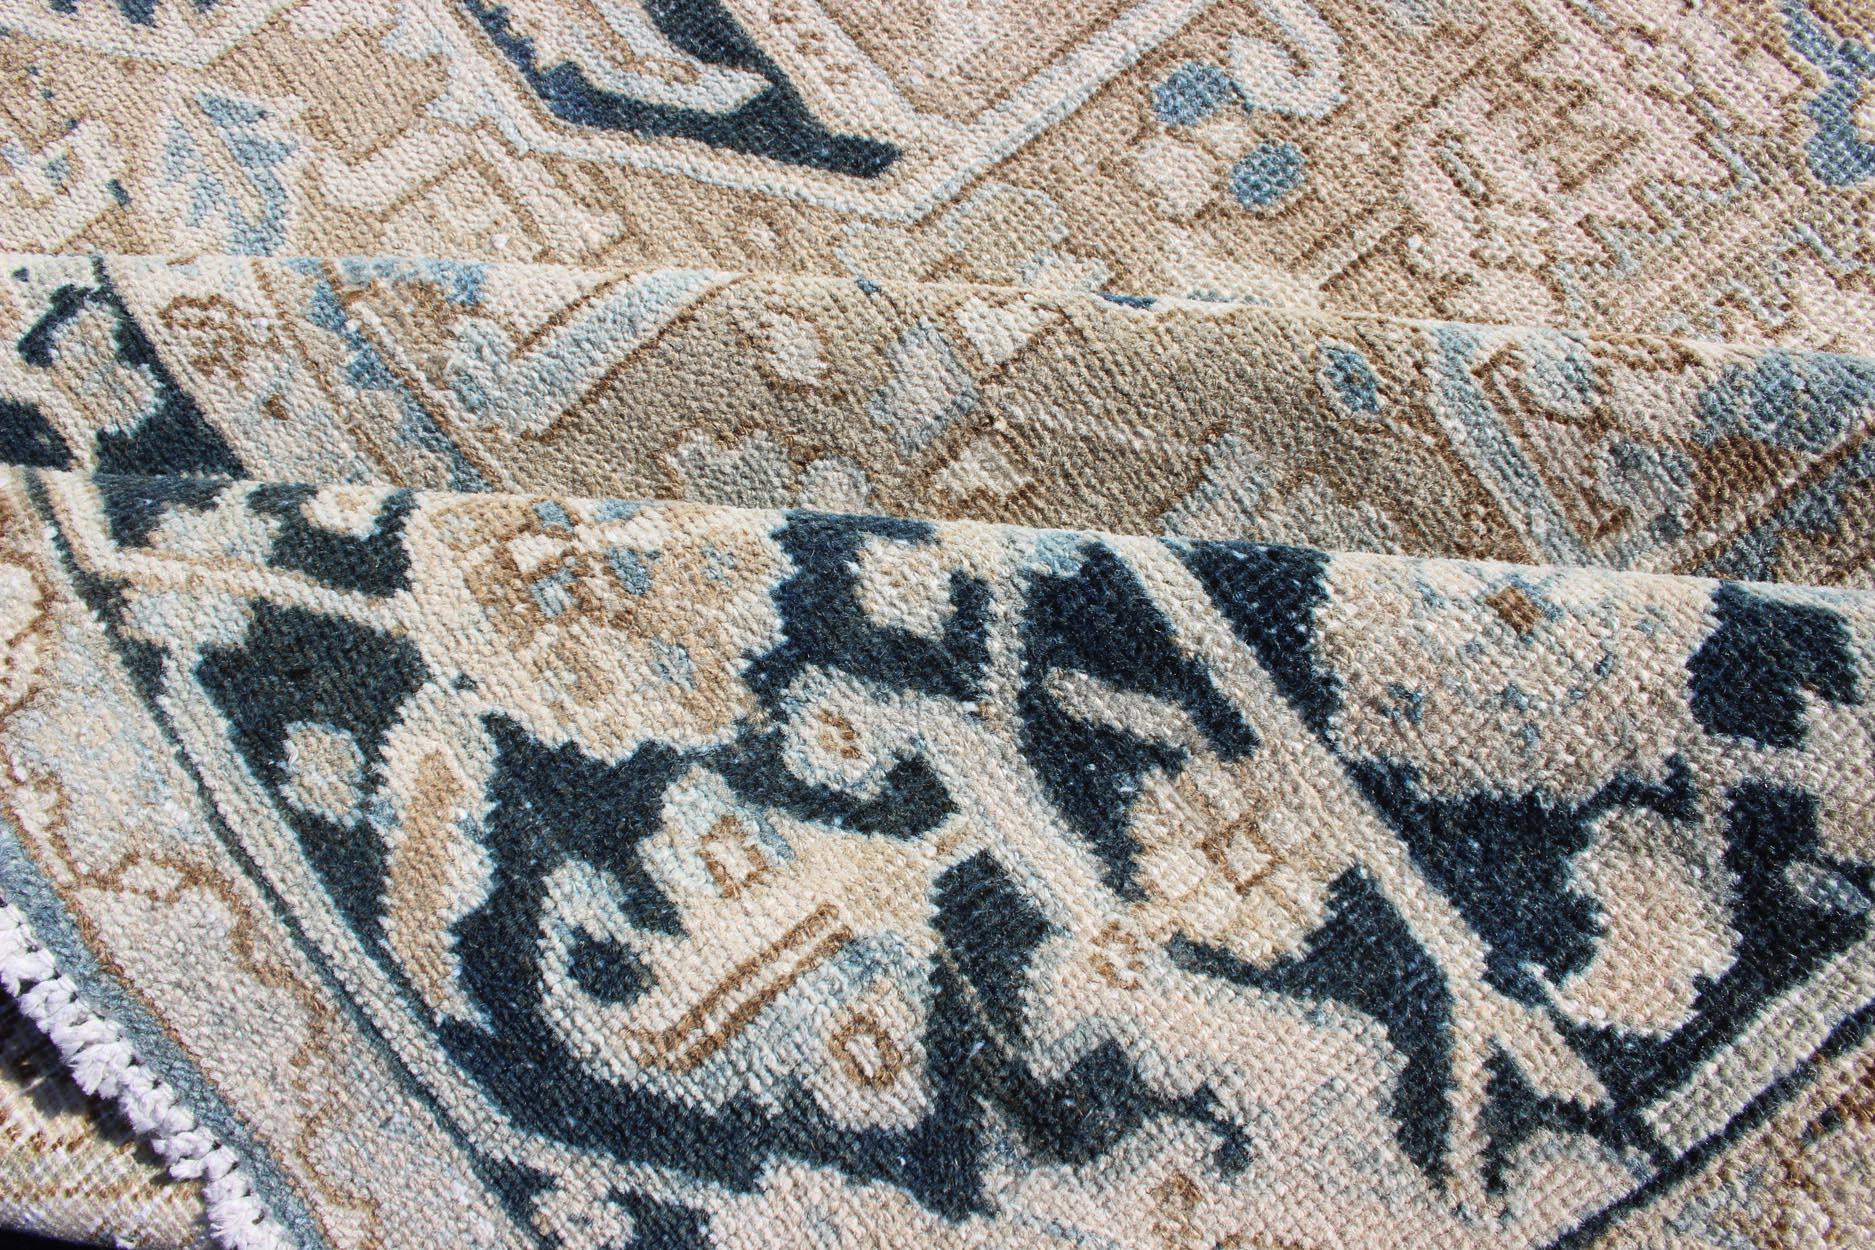 Antique Persian Heriz Rug with Geometric Medallion Design in Taupe, Blue-Gray In Good Condition For Sale In Atlanta, GA